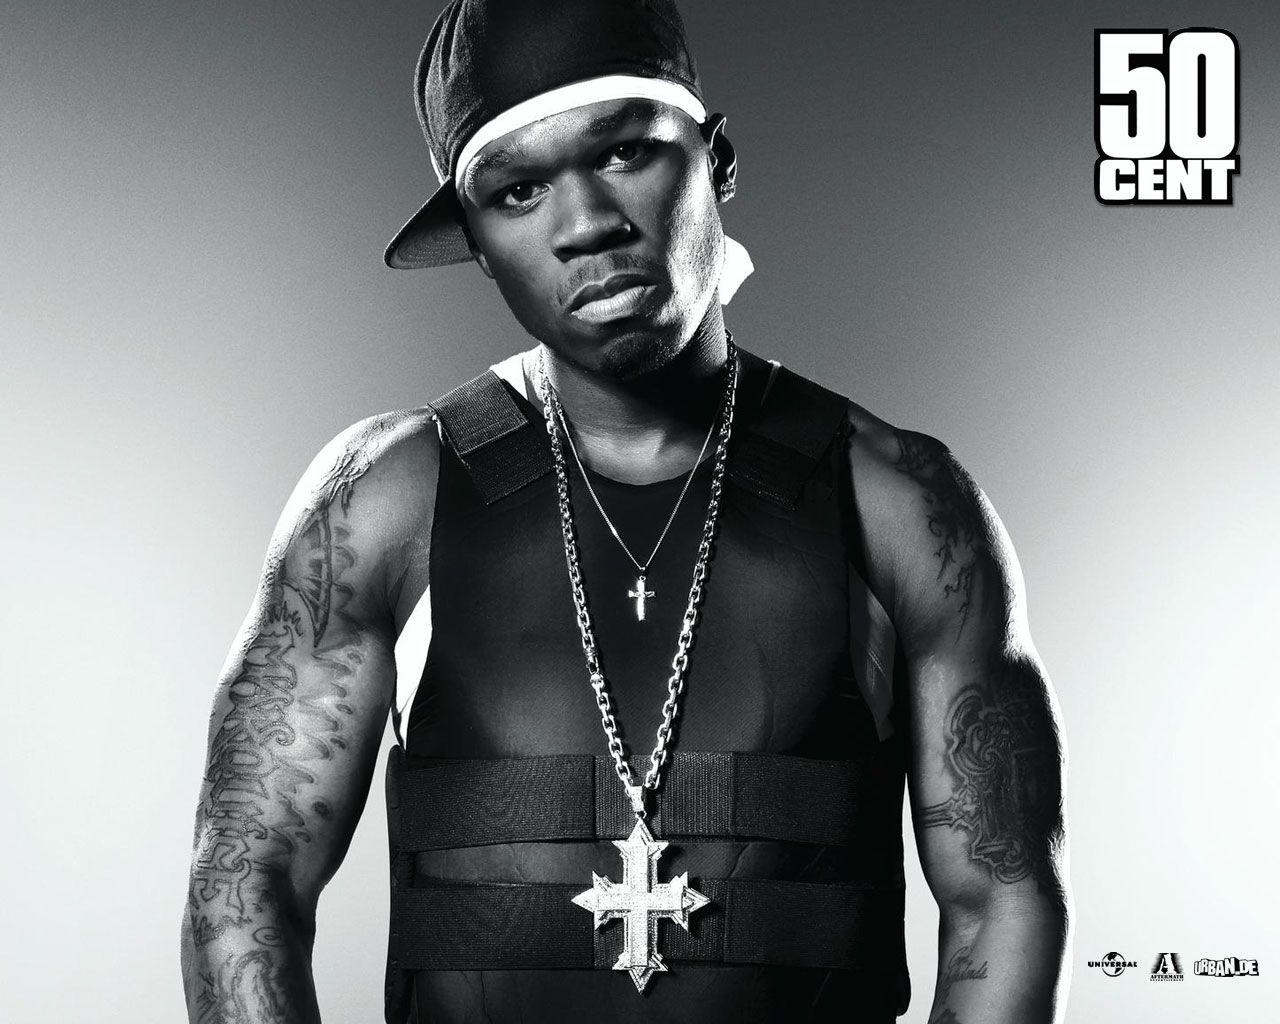 Download 50 Cent wallpapers for mobile phone free 50 Cent HD pictures